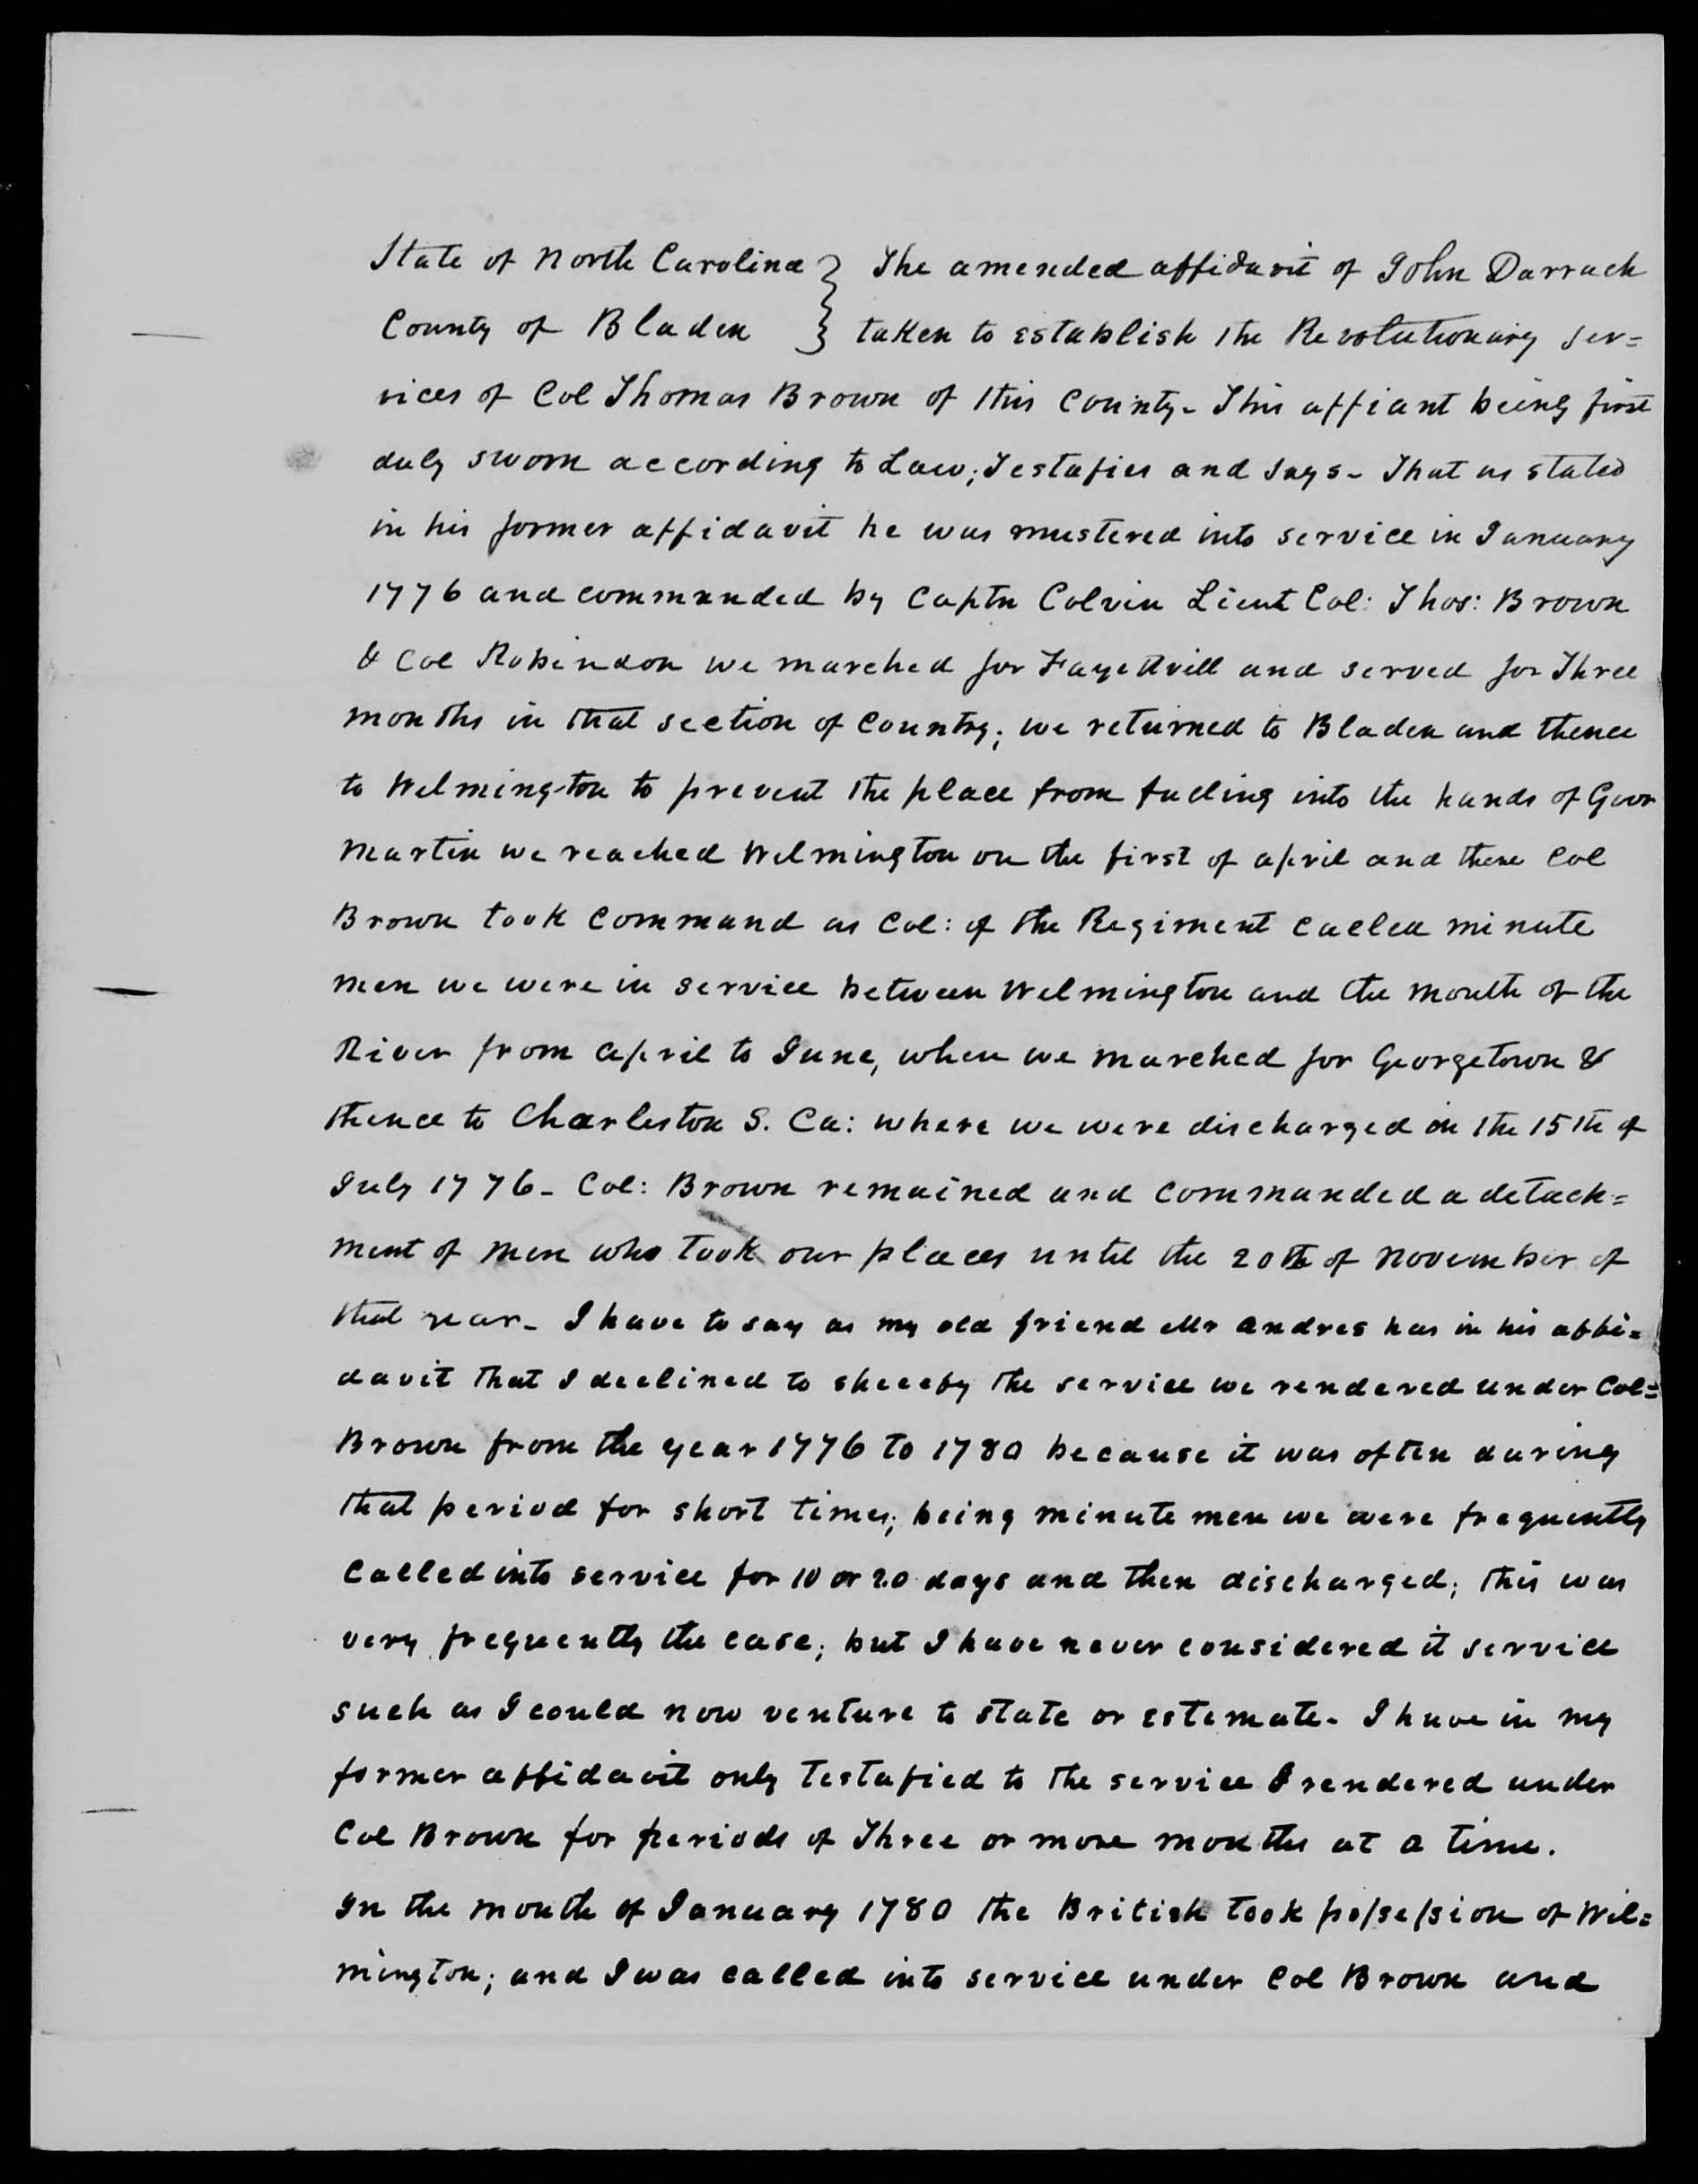 Affidavit of John Darrach (amended) in support of a Pension Claim for Lucy Brown, 8 June 1839, page 1